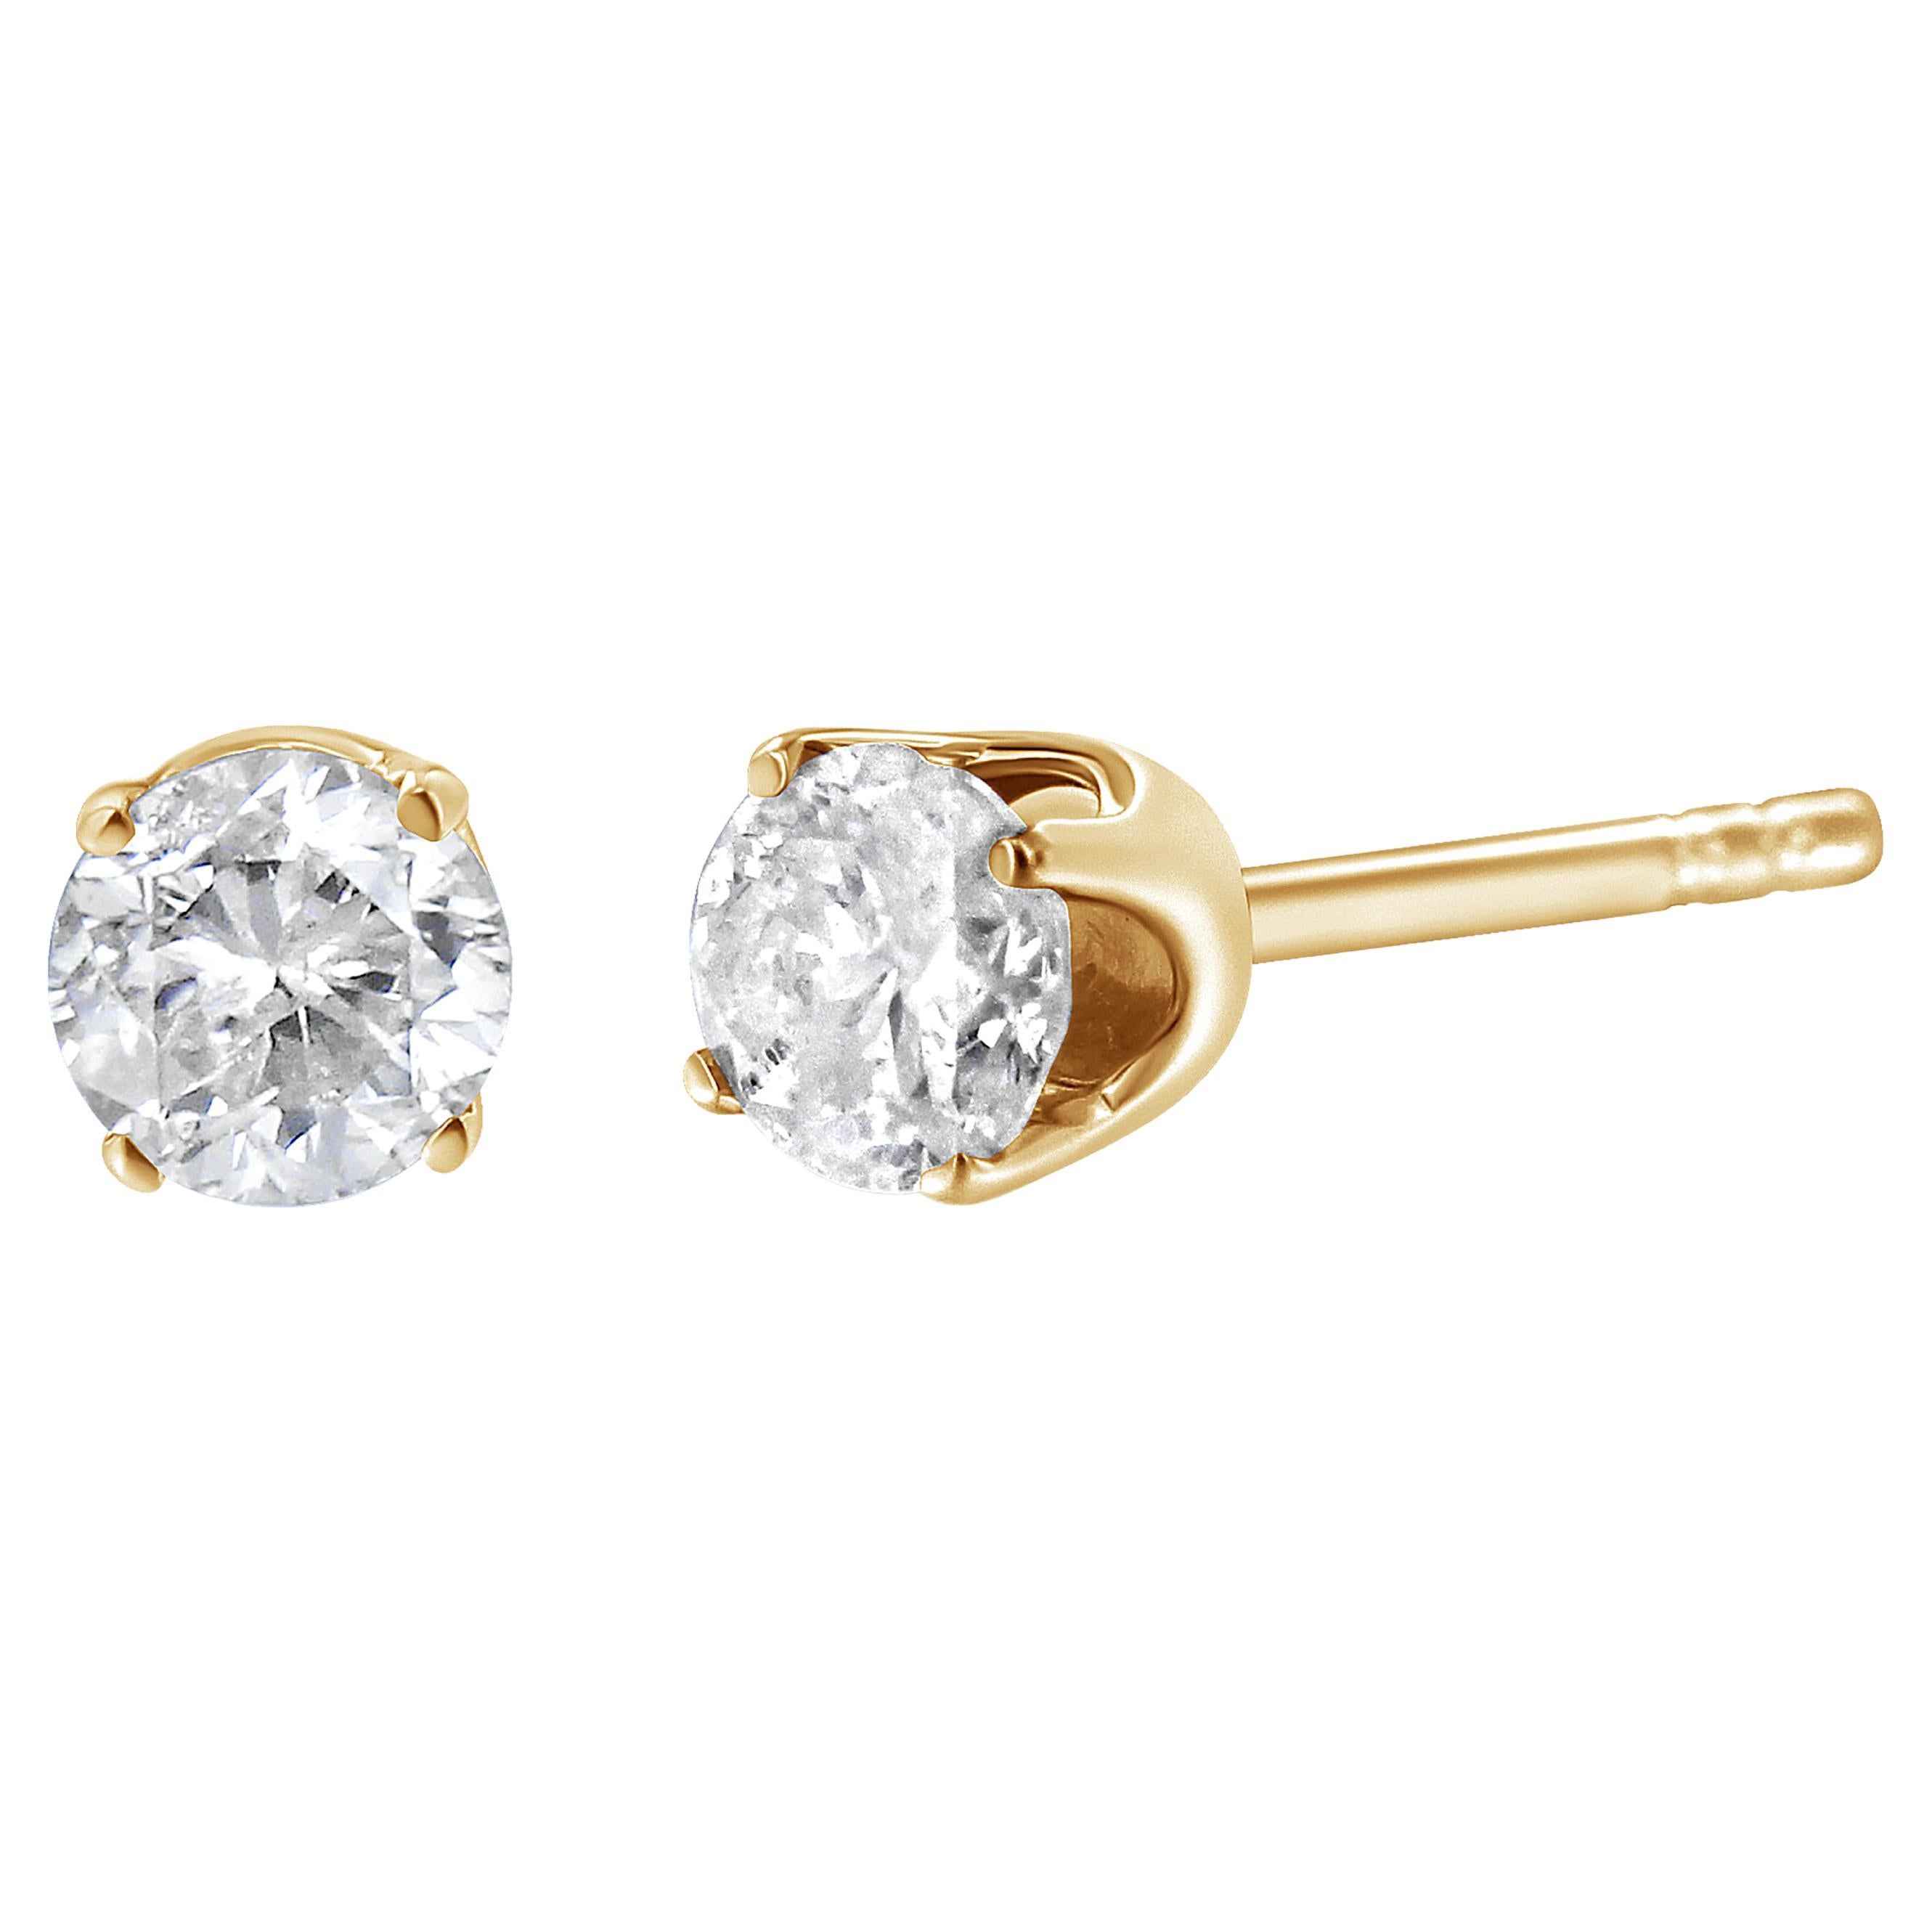 AGS Certified 14K Yellow Gold 3/8 Carat Round Solitaire Diamond Stud Earrings